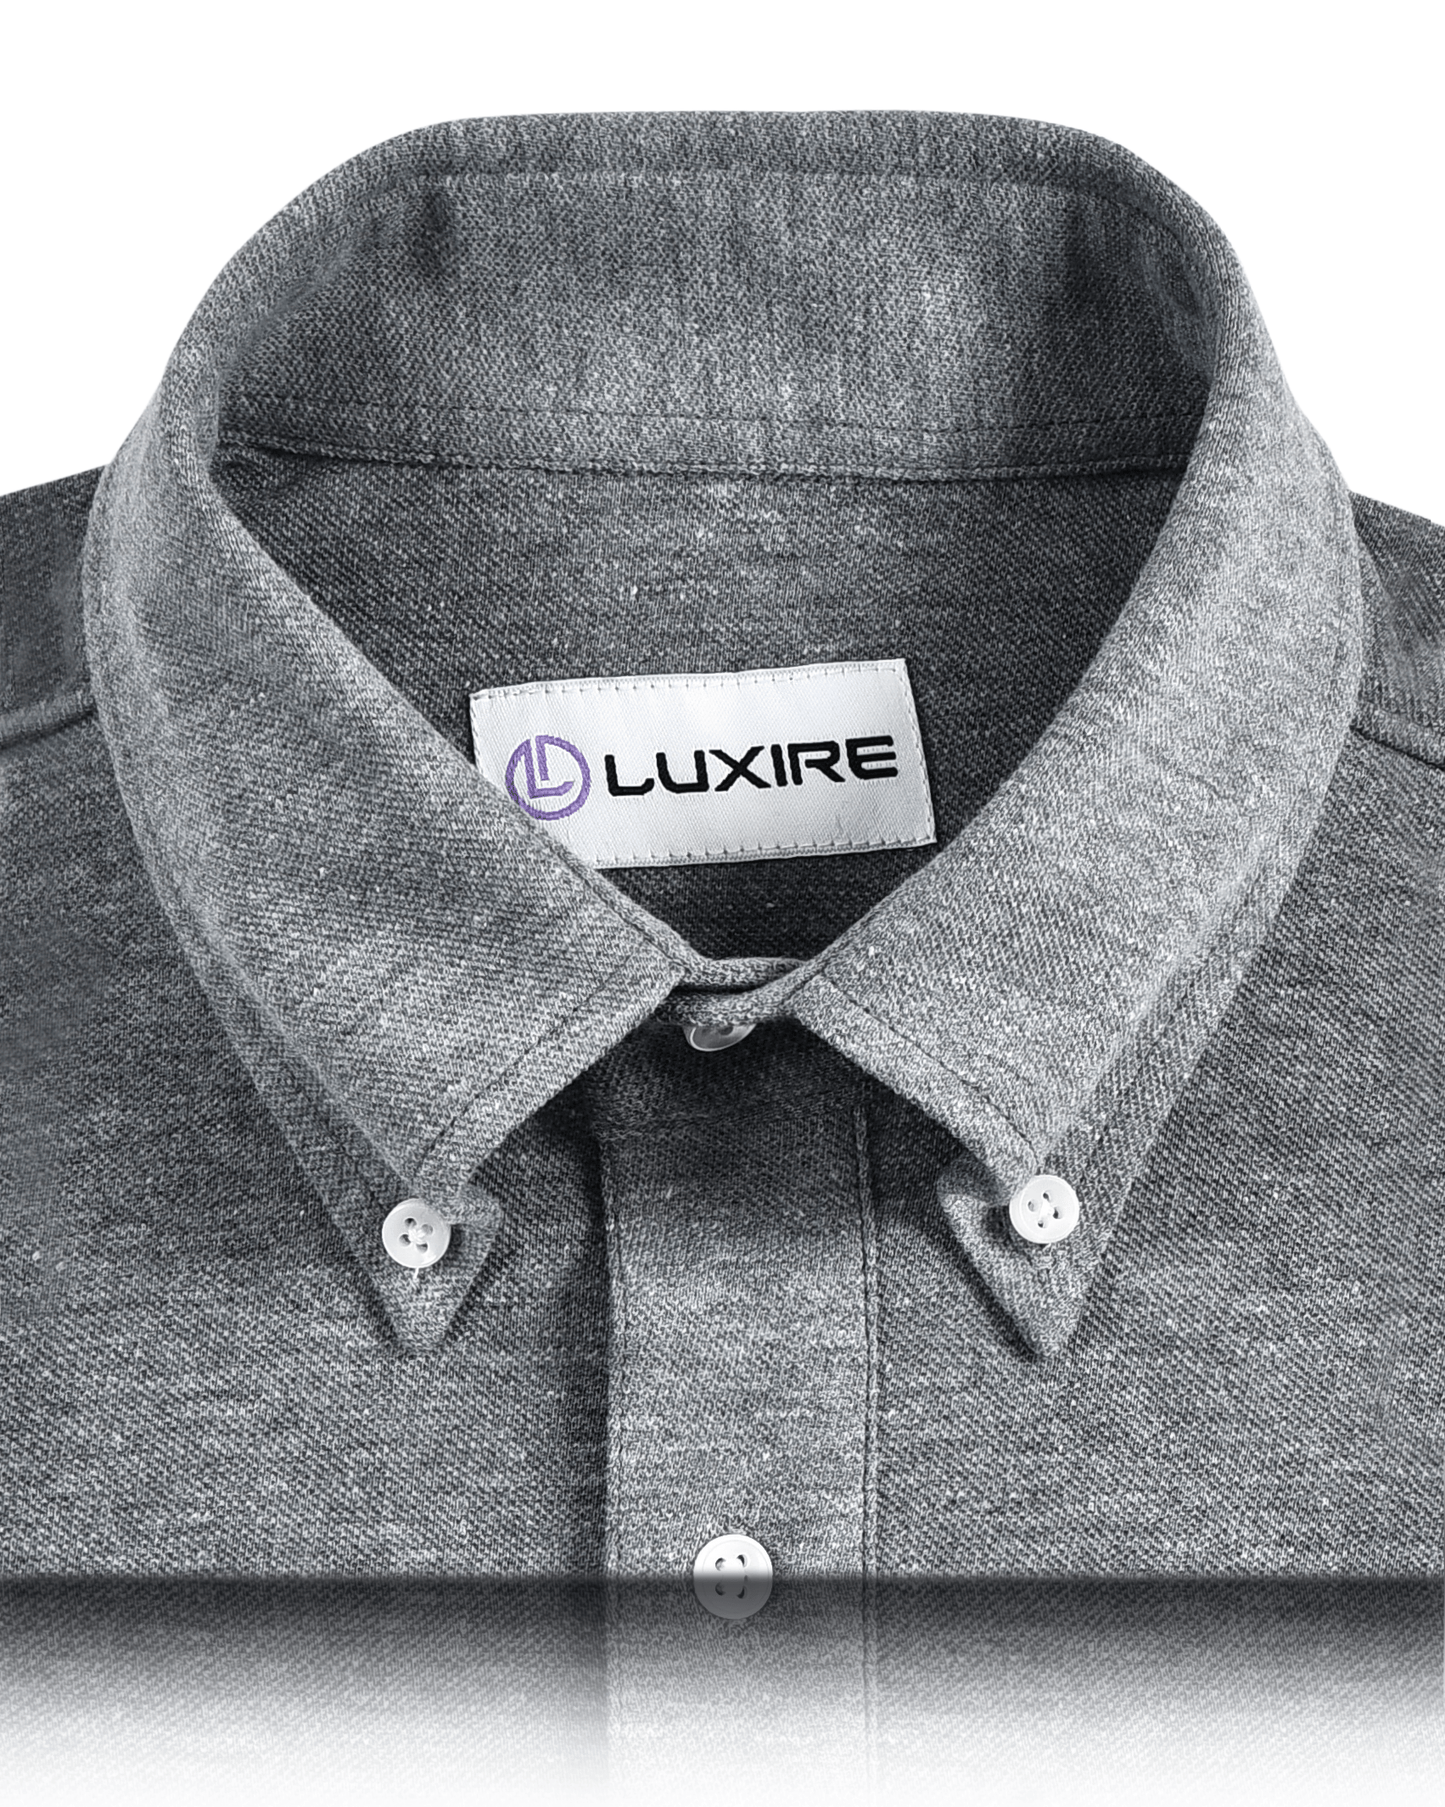 Collar of the custom oxford polo shirt for men by Luxire in slate grey